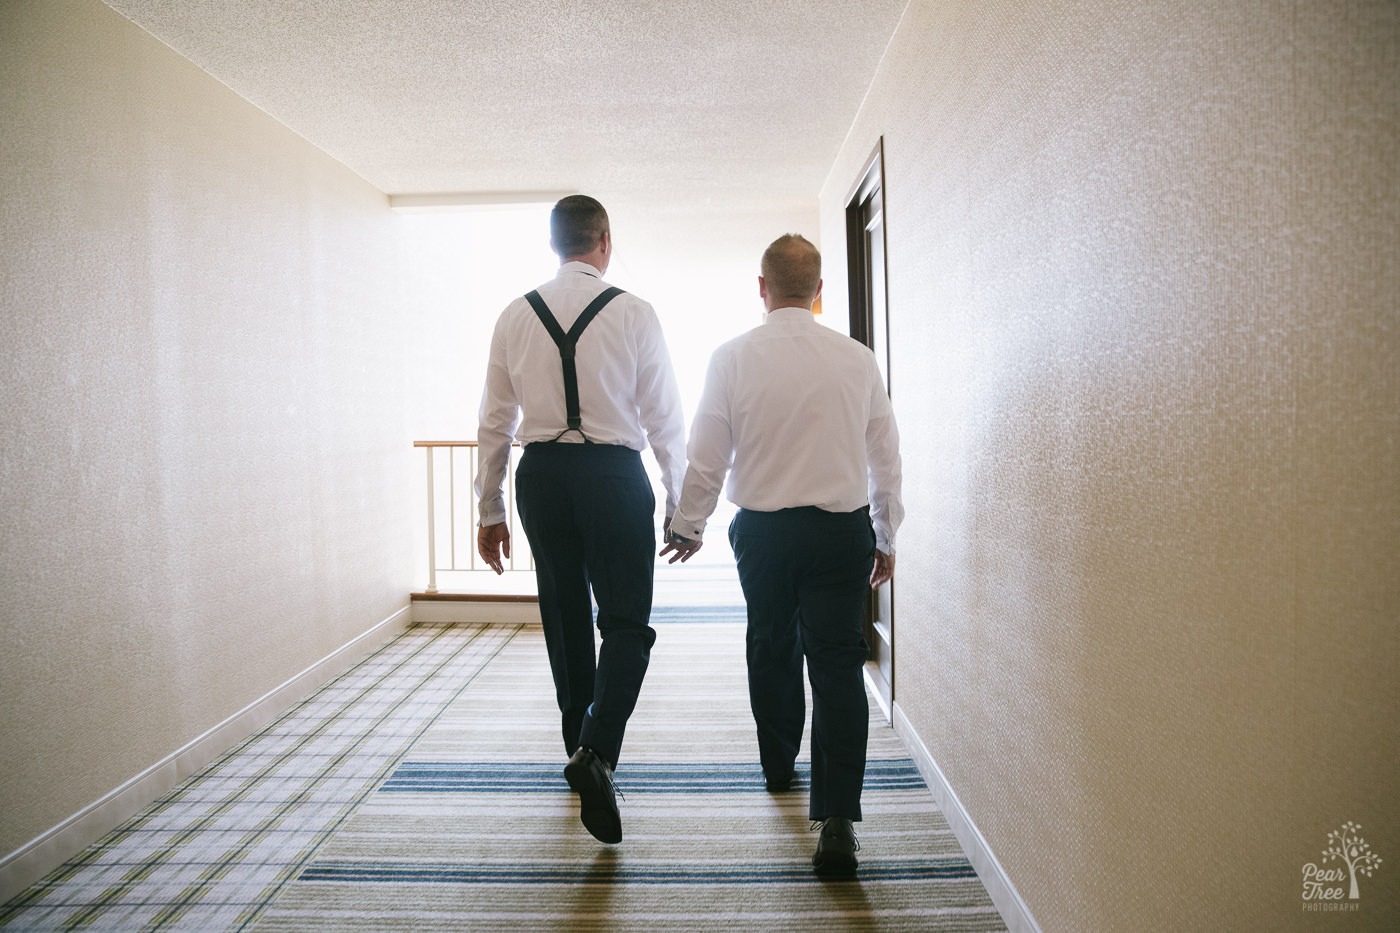 Two grooms holding hands and walking down Renaissance Concourse Atlanta hallway towards the light.